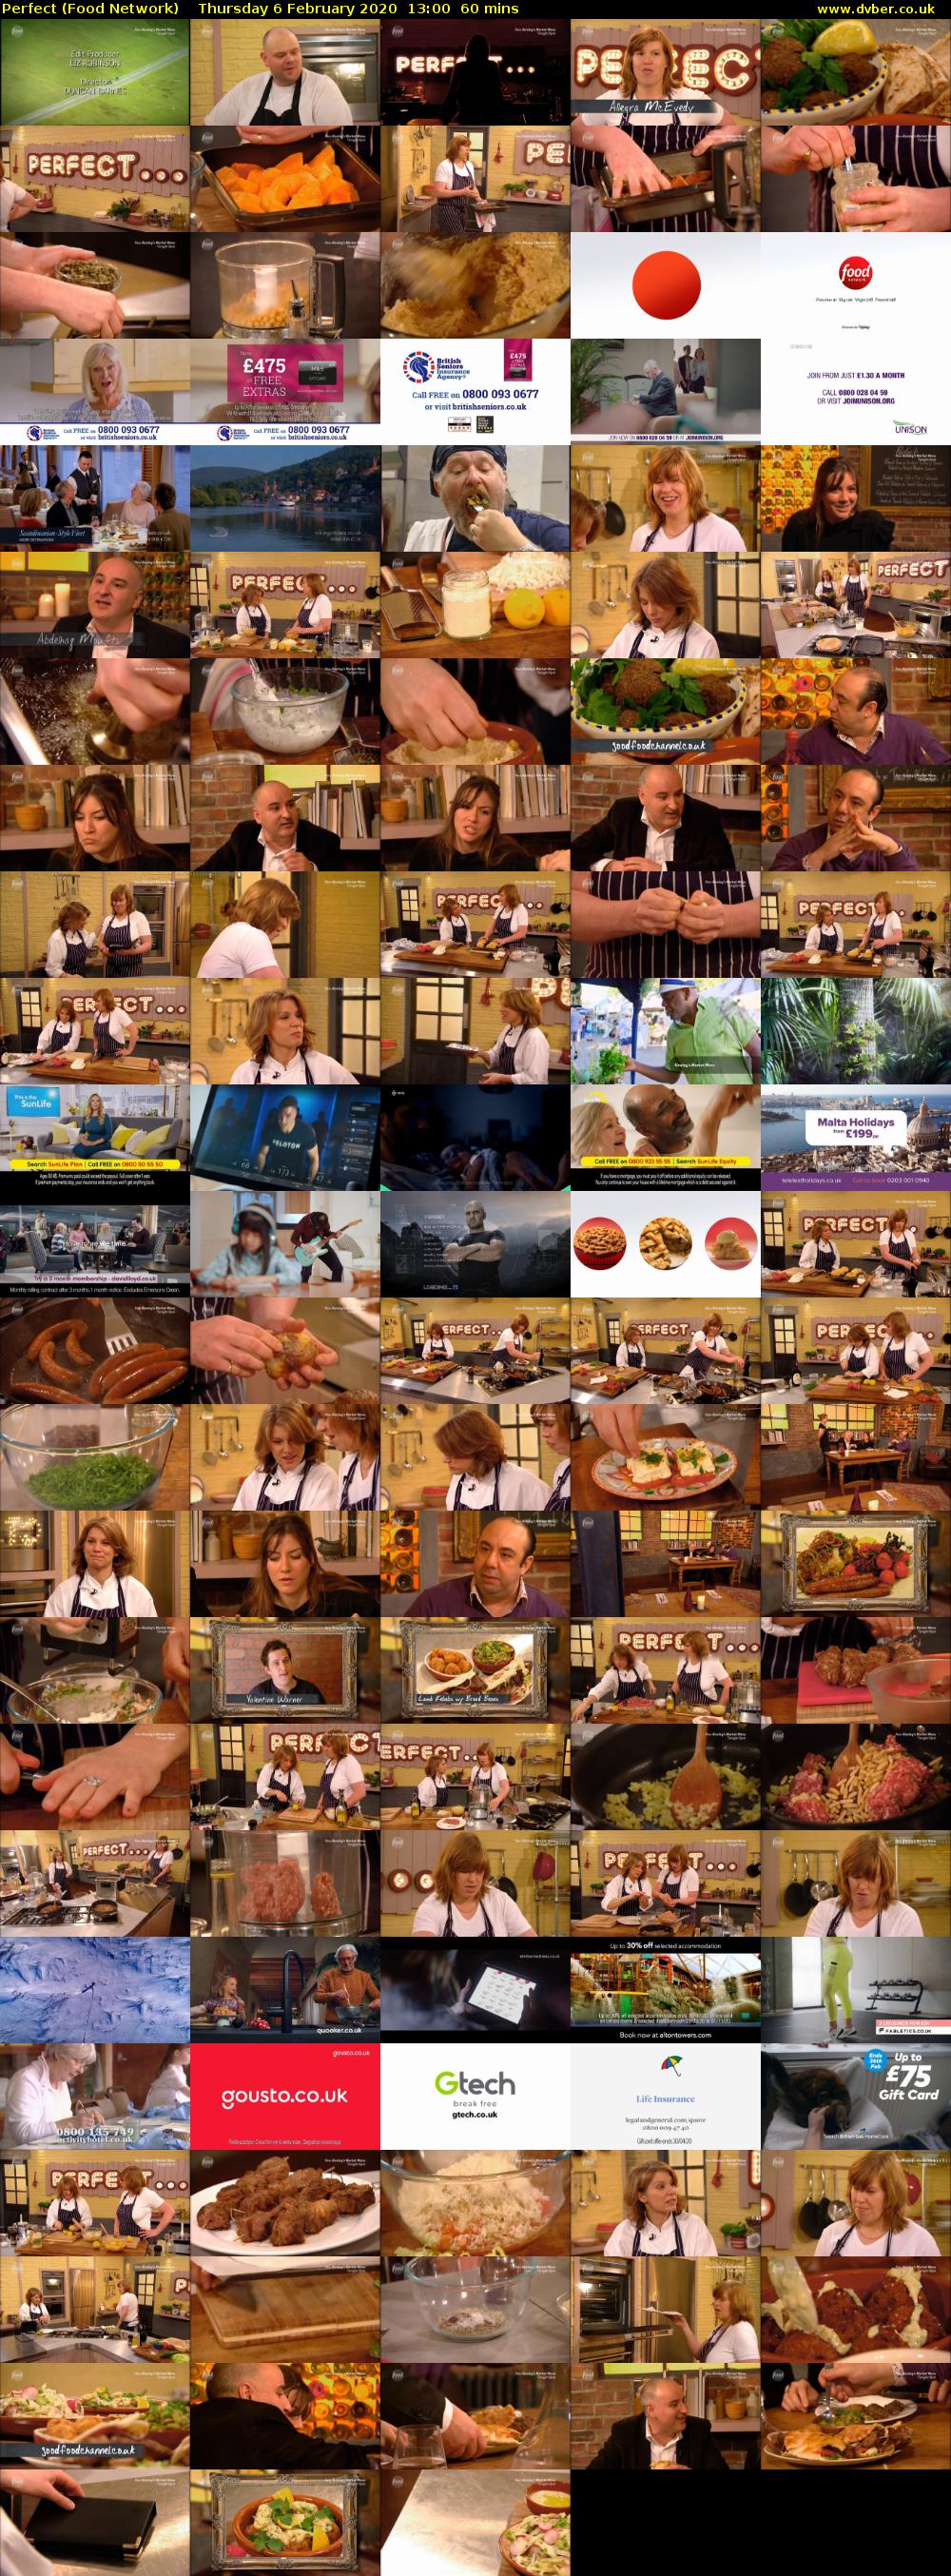 Perfect (Food Network) Thursday 6 February 2020 13:00 - 14:00